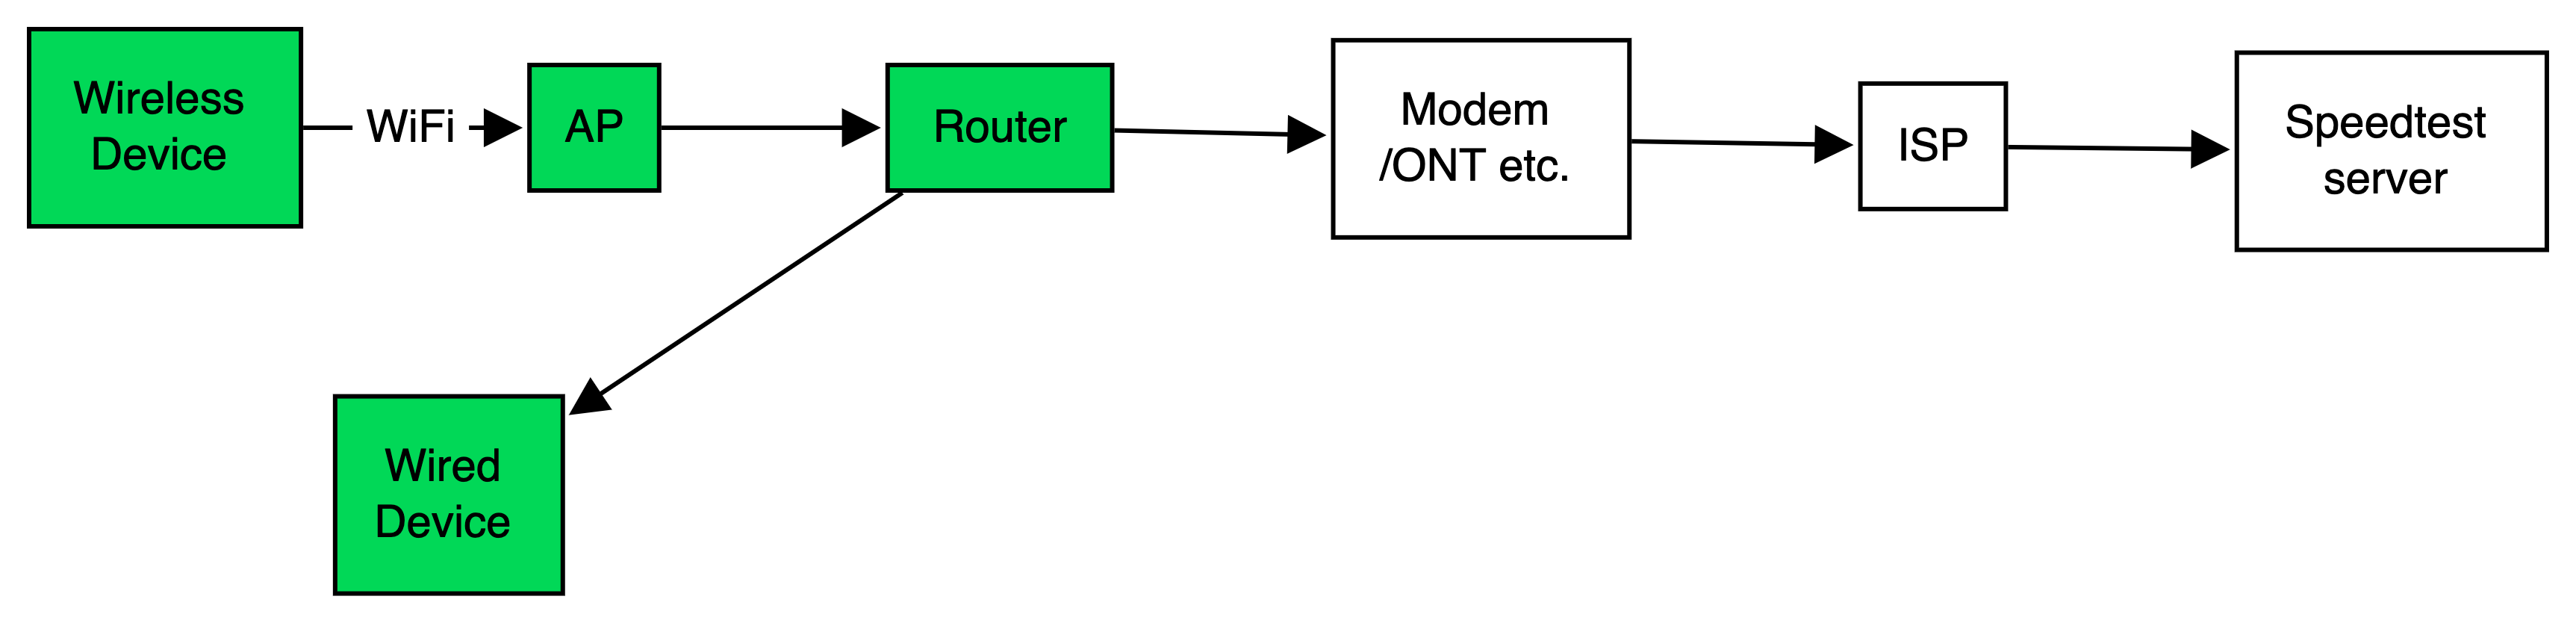 Speed test connection flowchart of four green boxes identifying your network and Firewalla to internet speed servers shown in white.